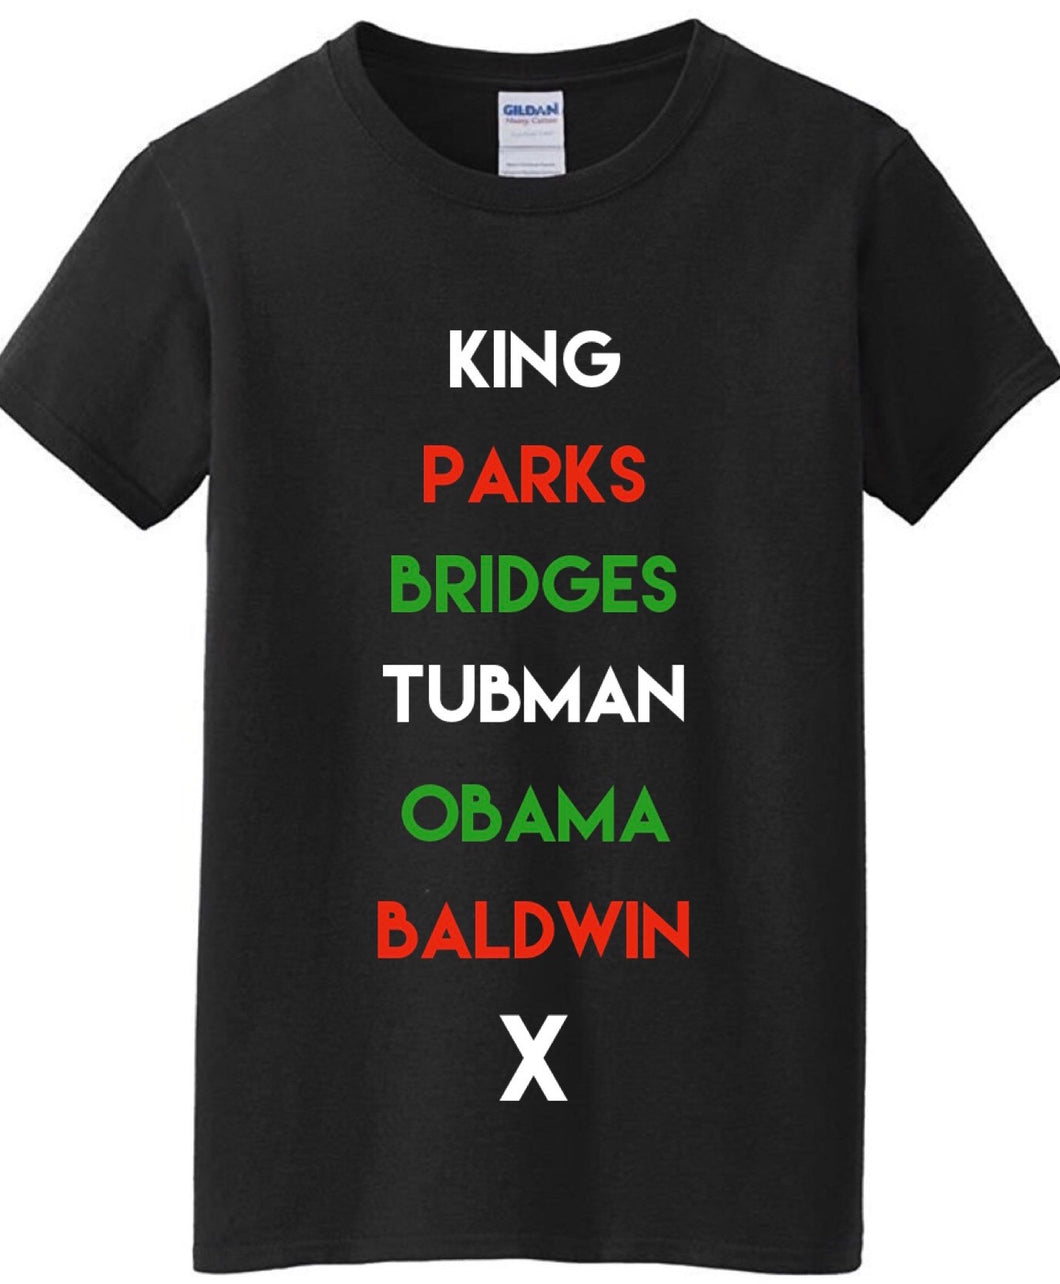 Historical Figures BHM (black history month) inspired crewneck ss t-shirt